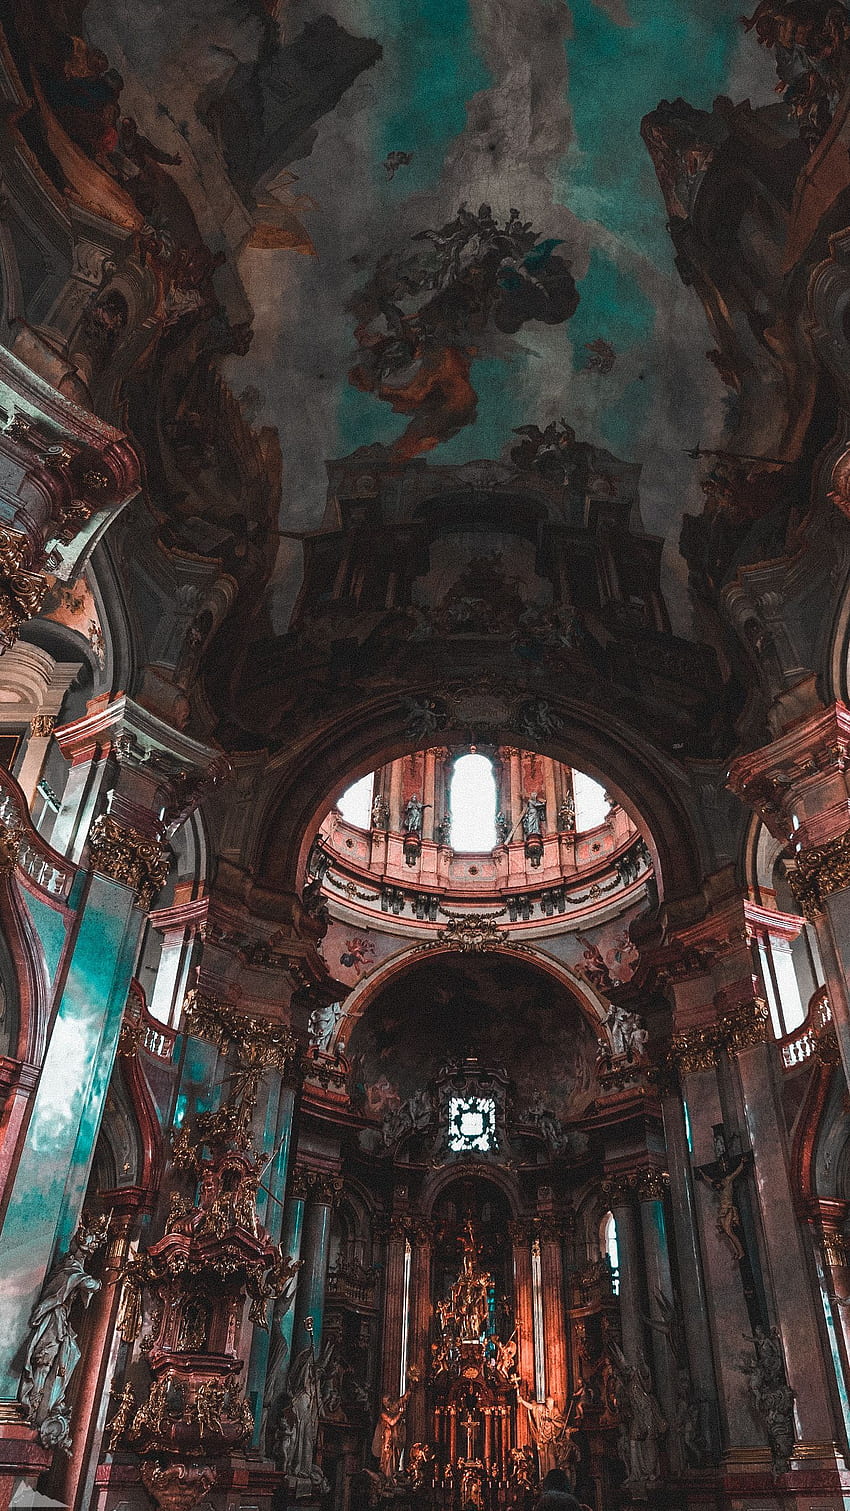 A large church with many paintings on the ceiling - Architecture